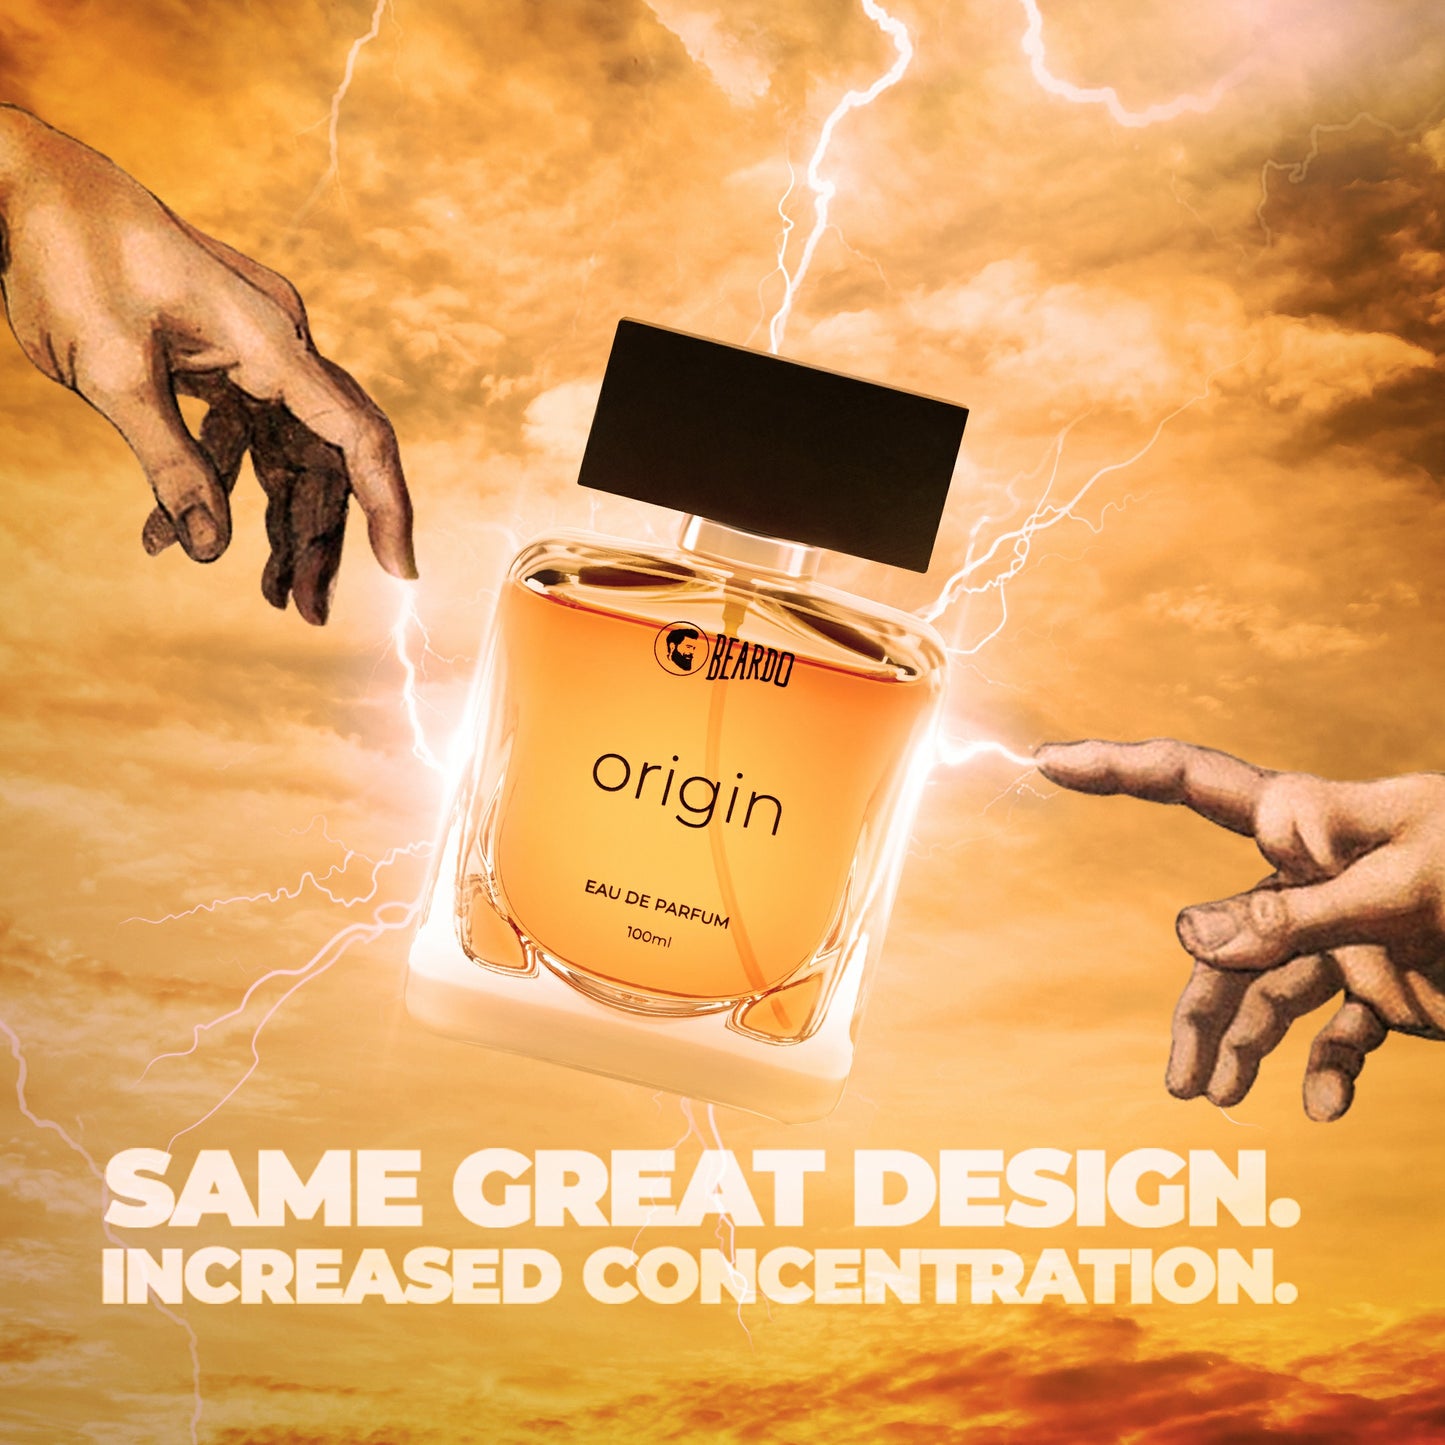 High concentration perfume